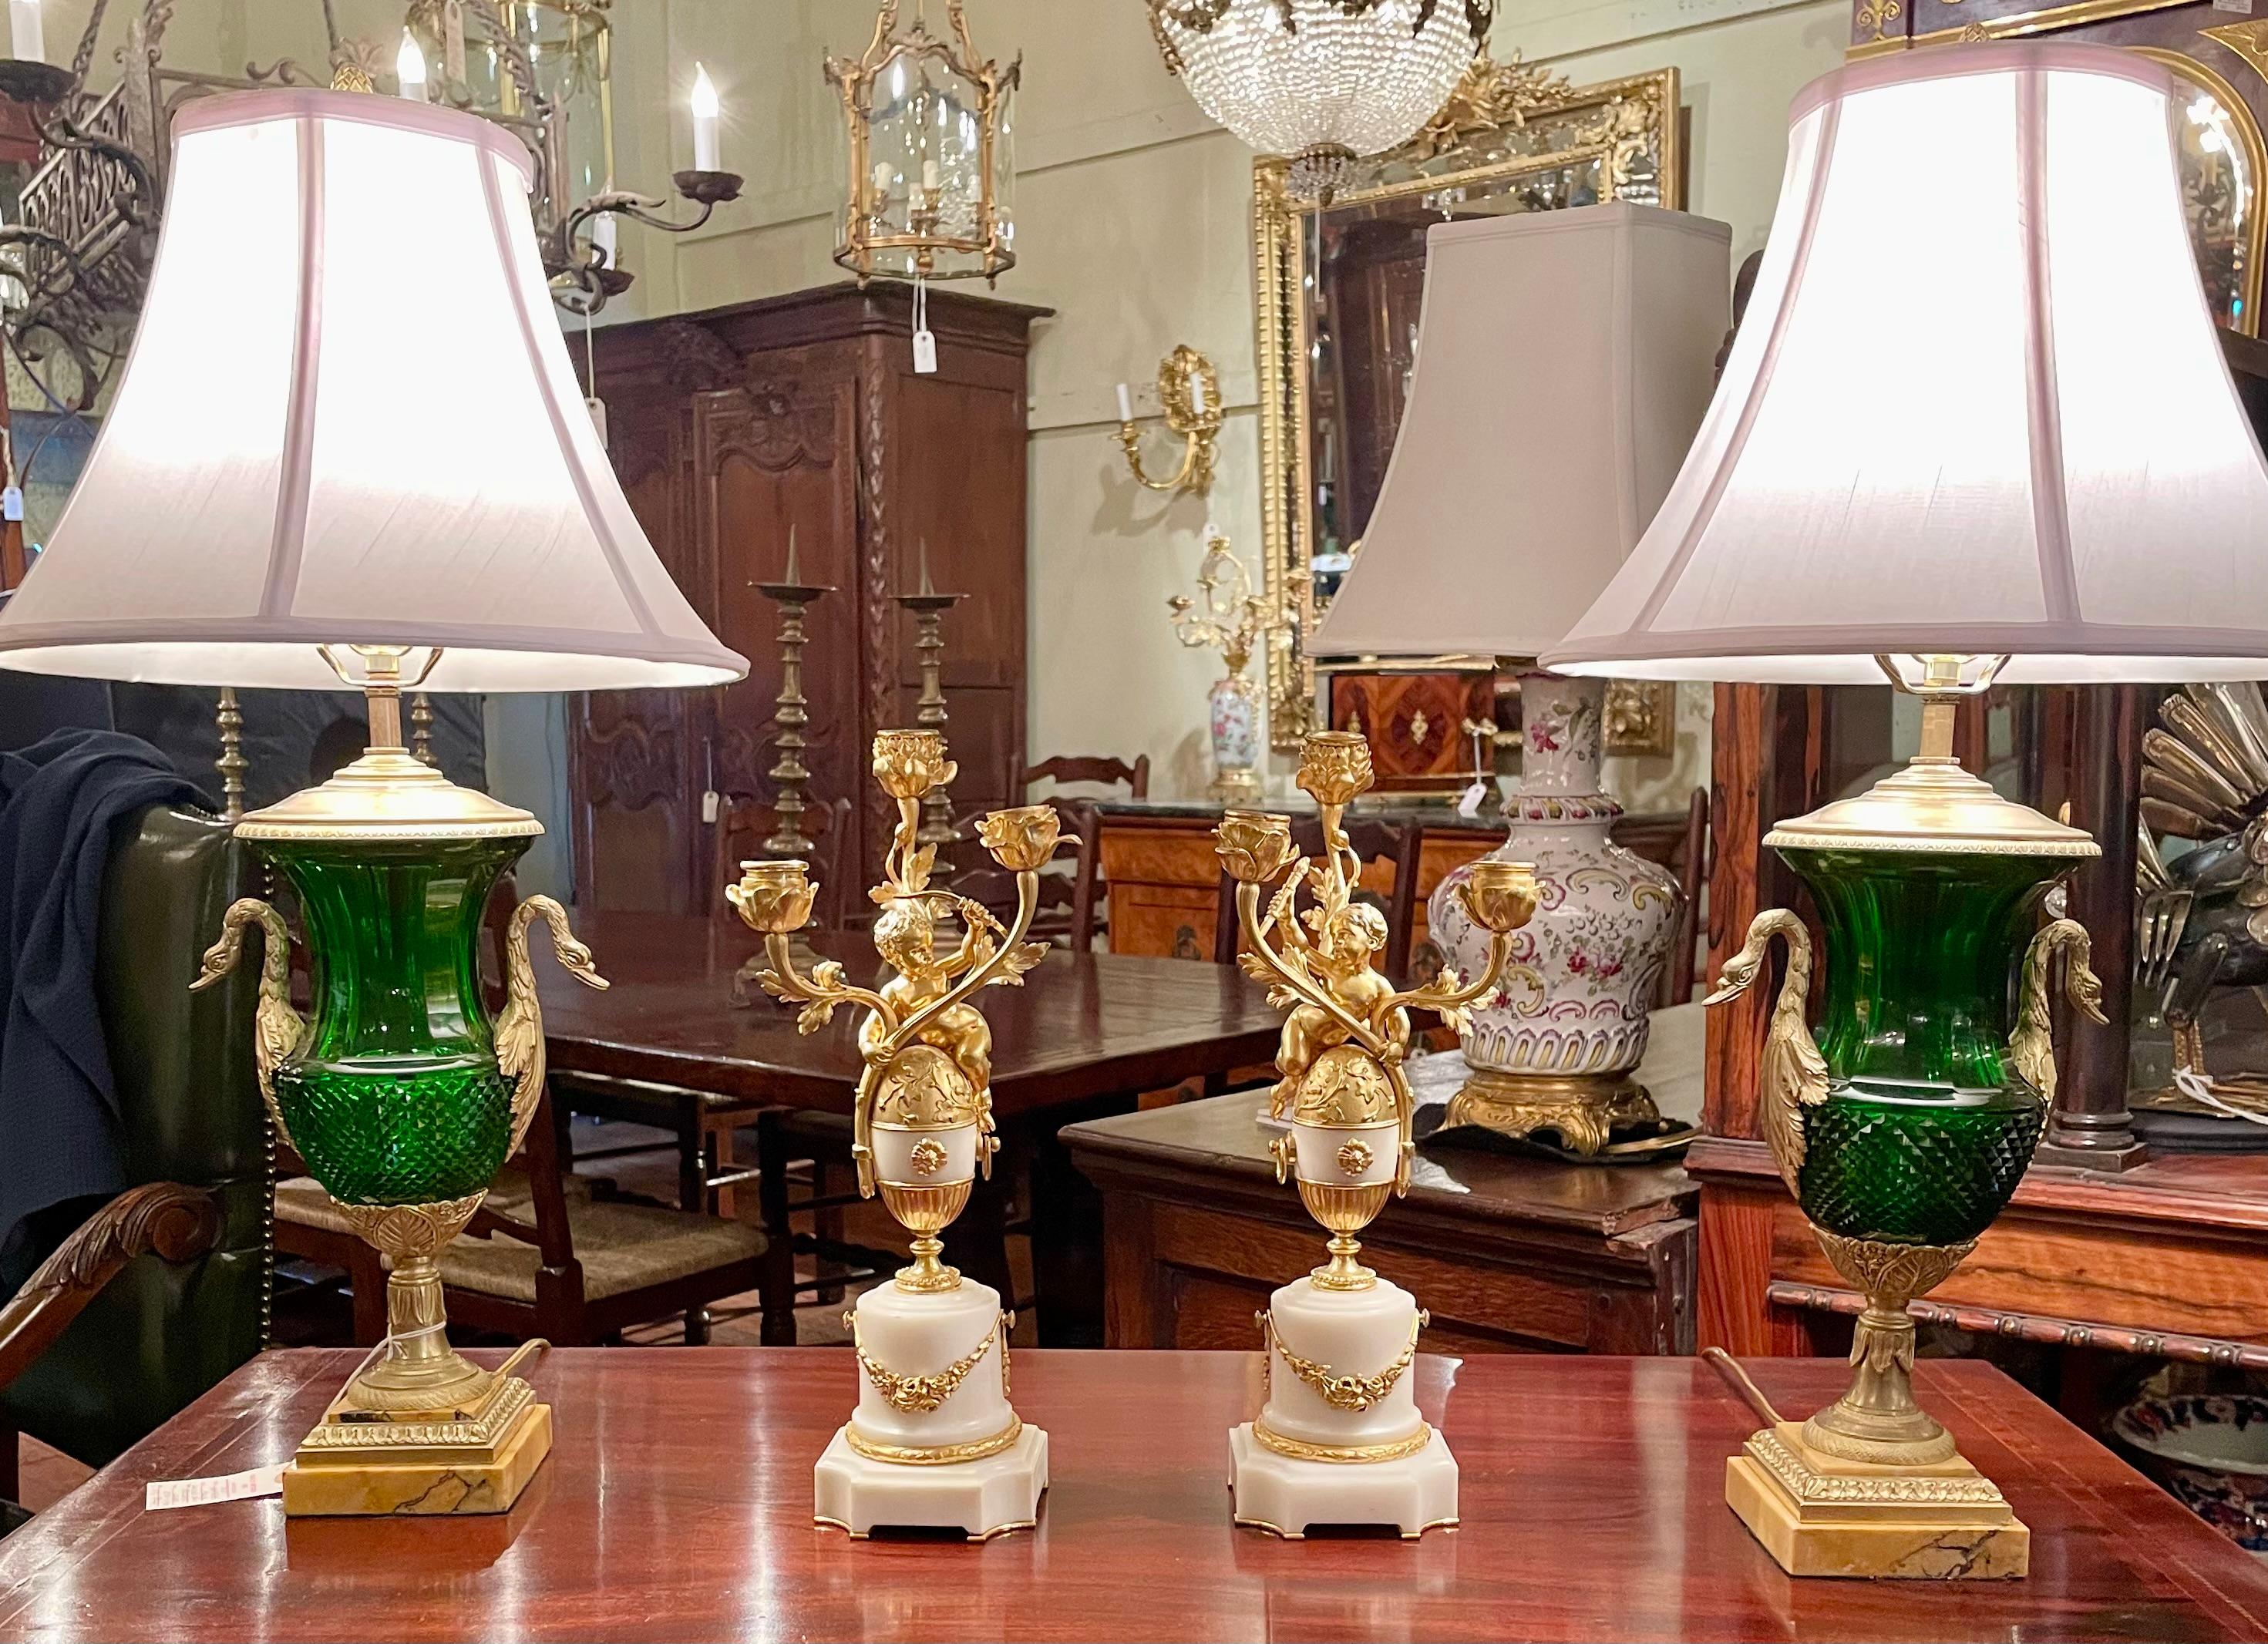 Pair Antique French 